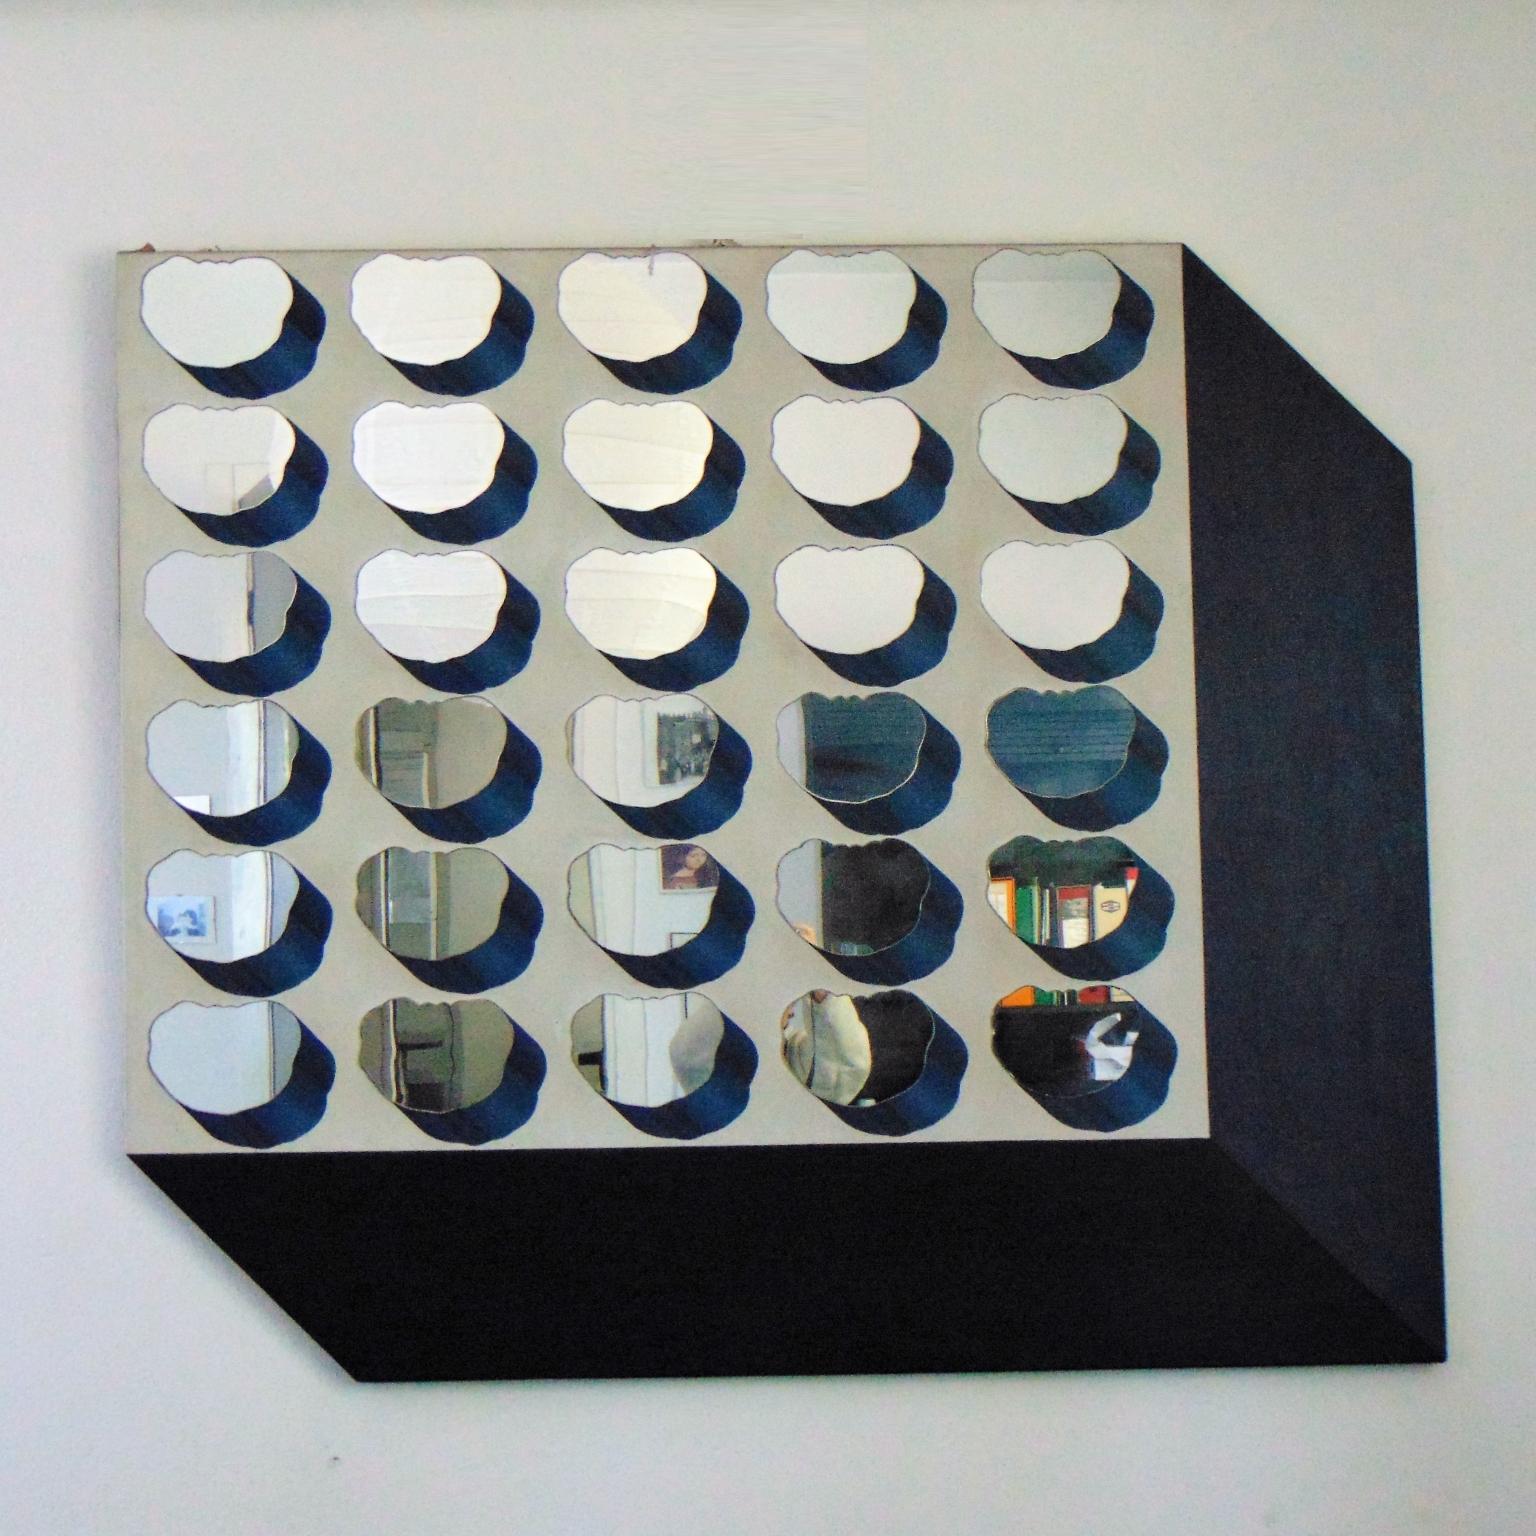 1968 Mirrored Pop Art Wall Sculpture, Concetto Pozzati, Acrylic on Canvas, Italy For Sale 10